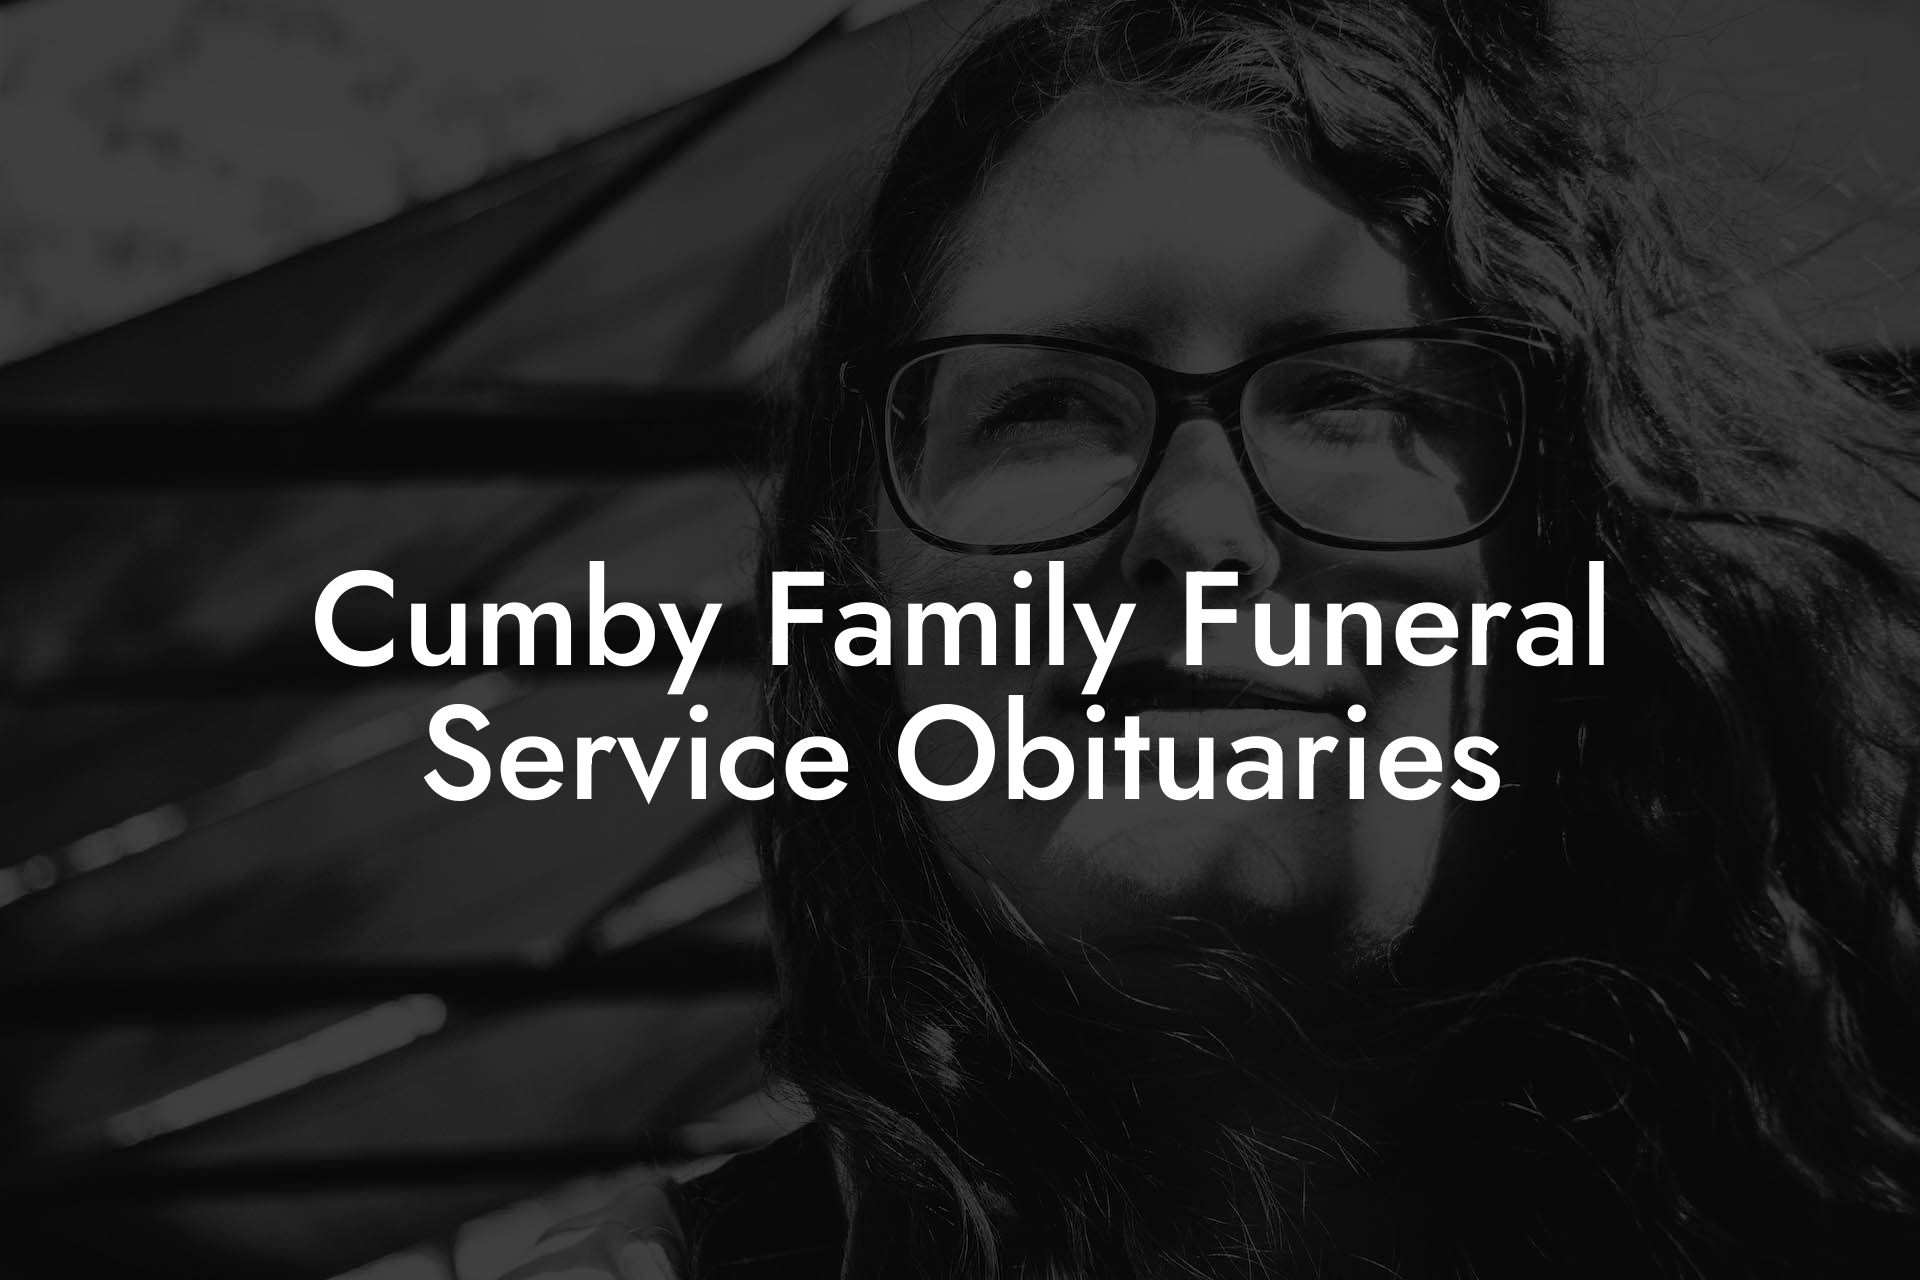 Cumby Family Funeral Service Obituaries